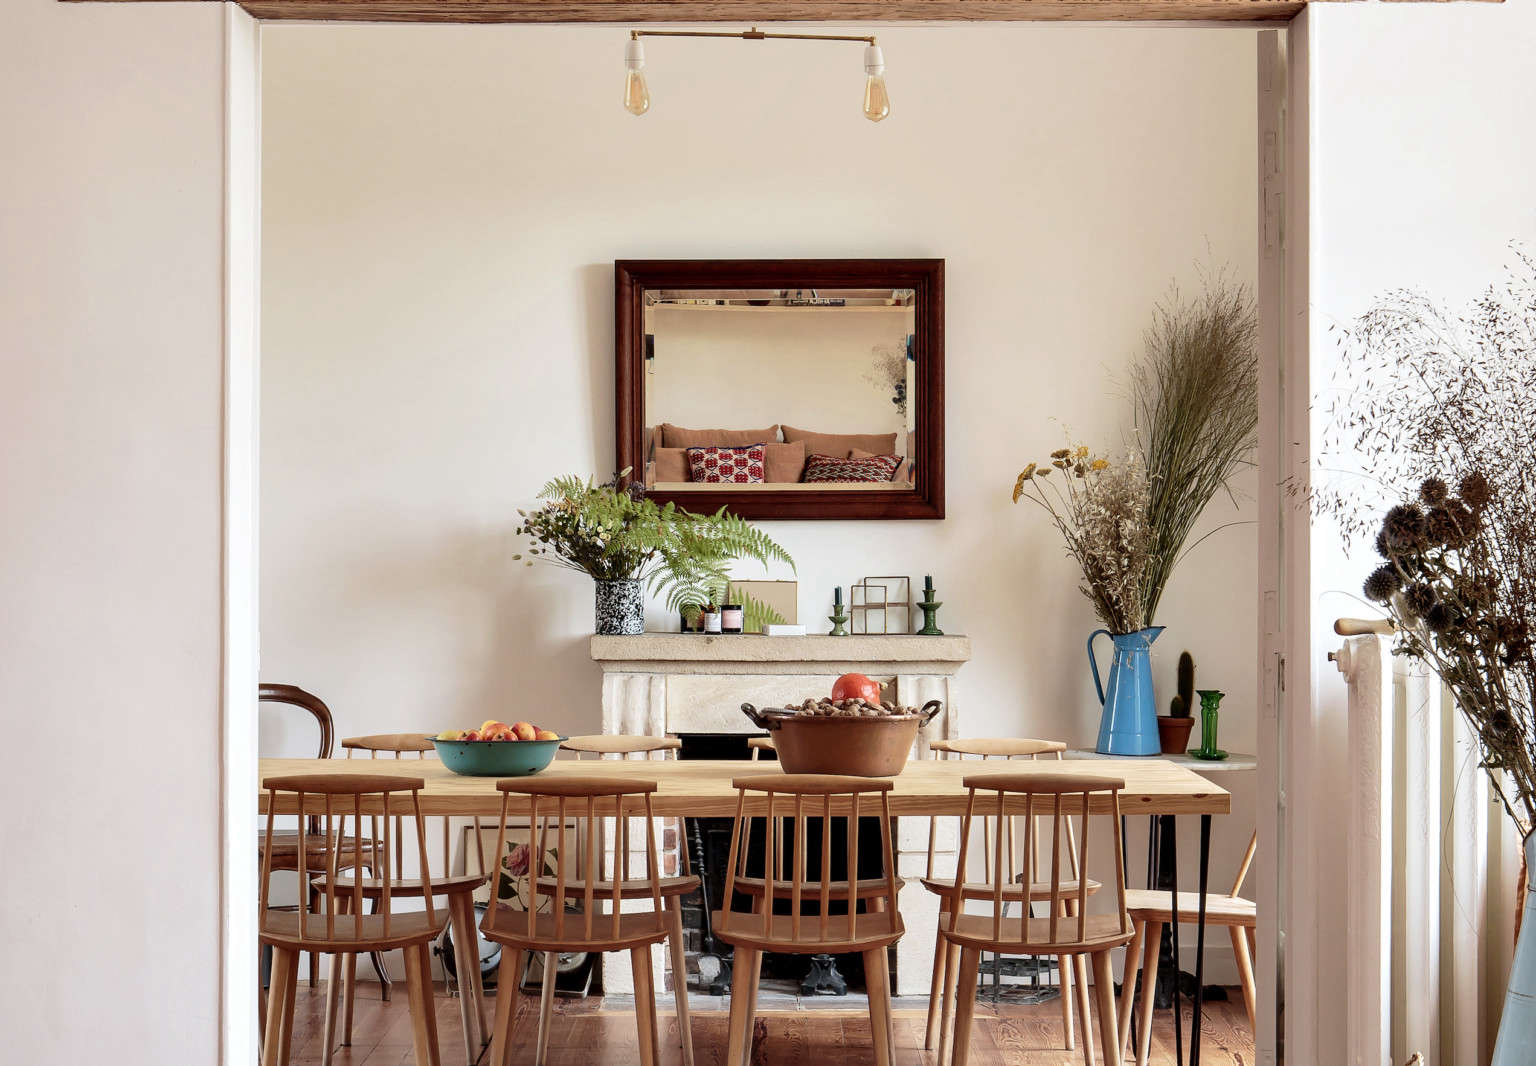 Kitchen of the Week: A France-Meets-California, Ikea-Meets-Custom Kitchen in Normandy